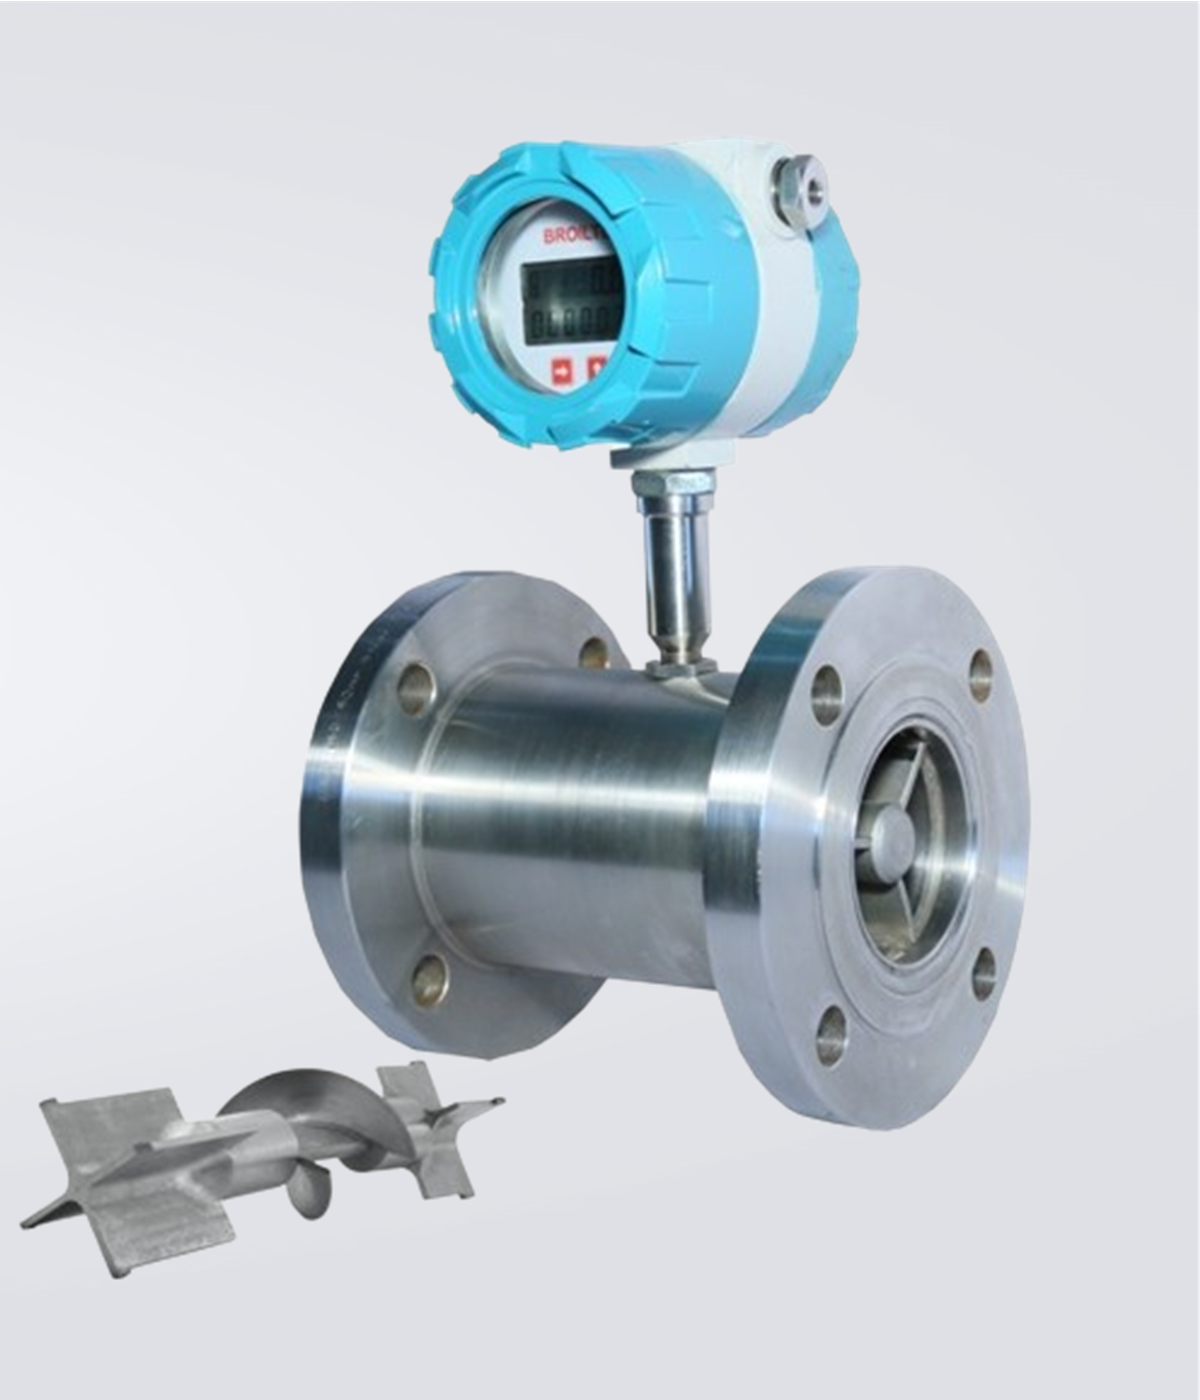 Helical Rotor Flow Meter with Flange end Connections